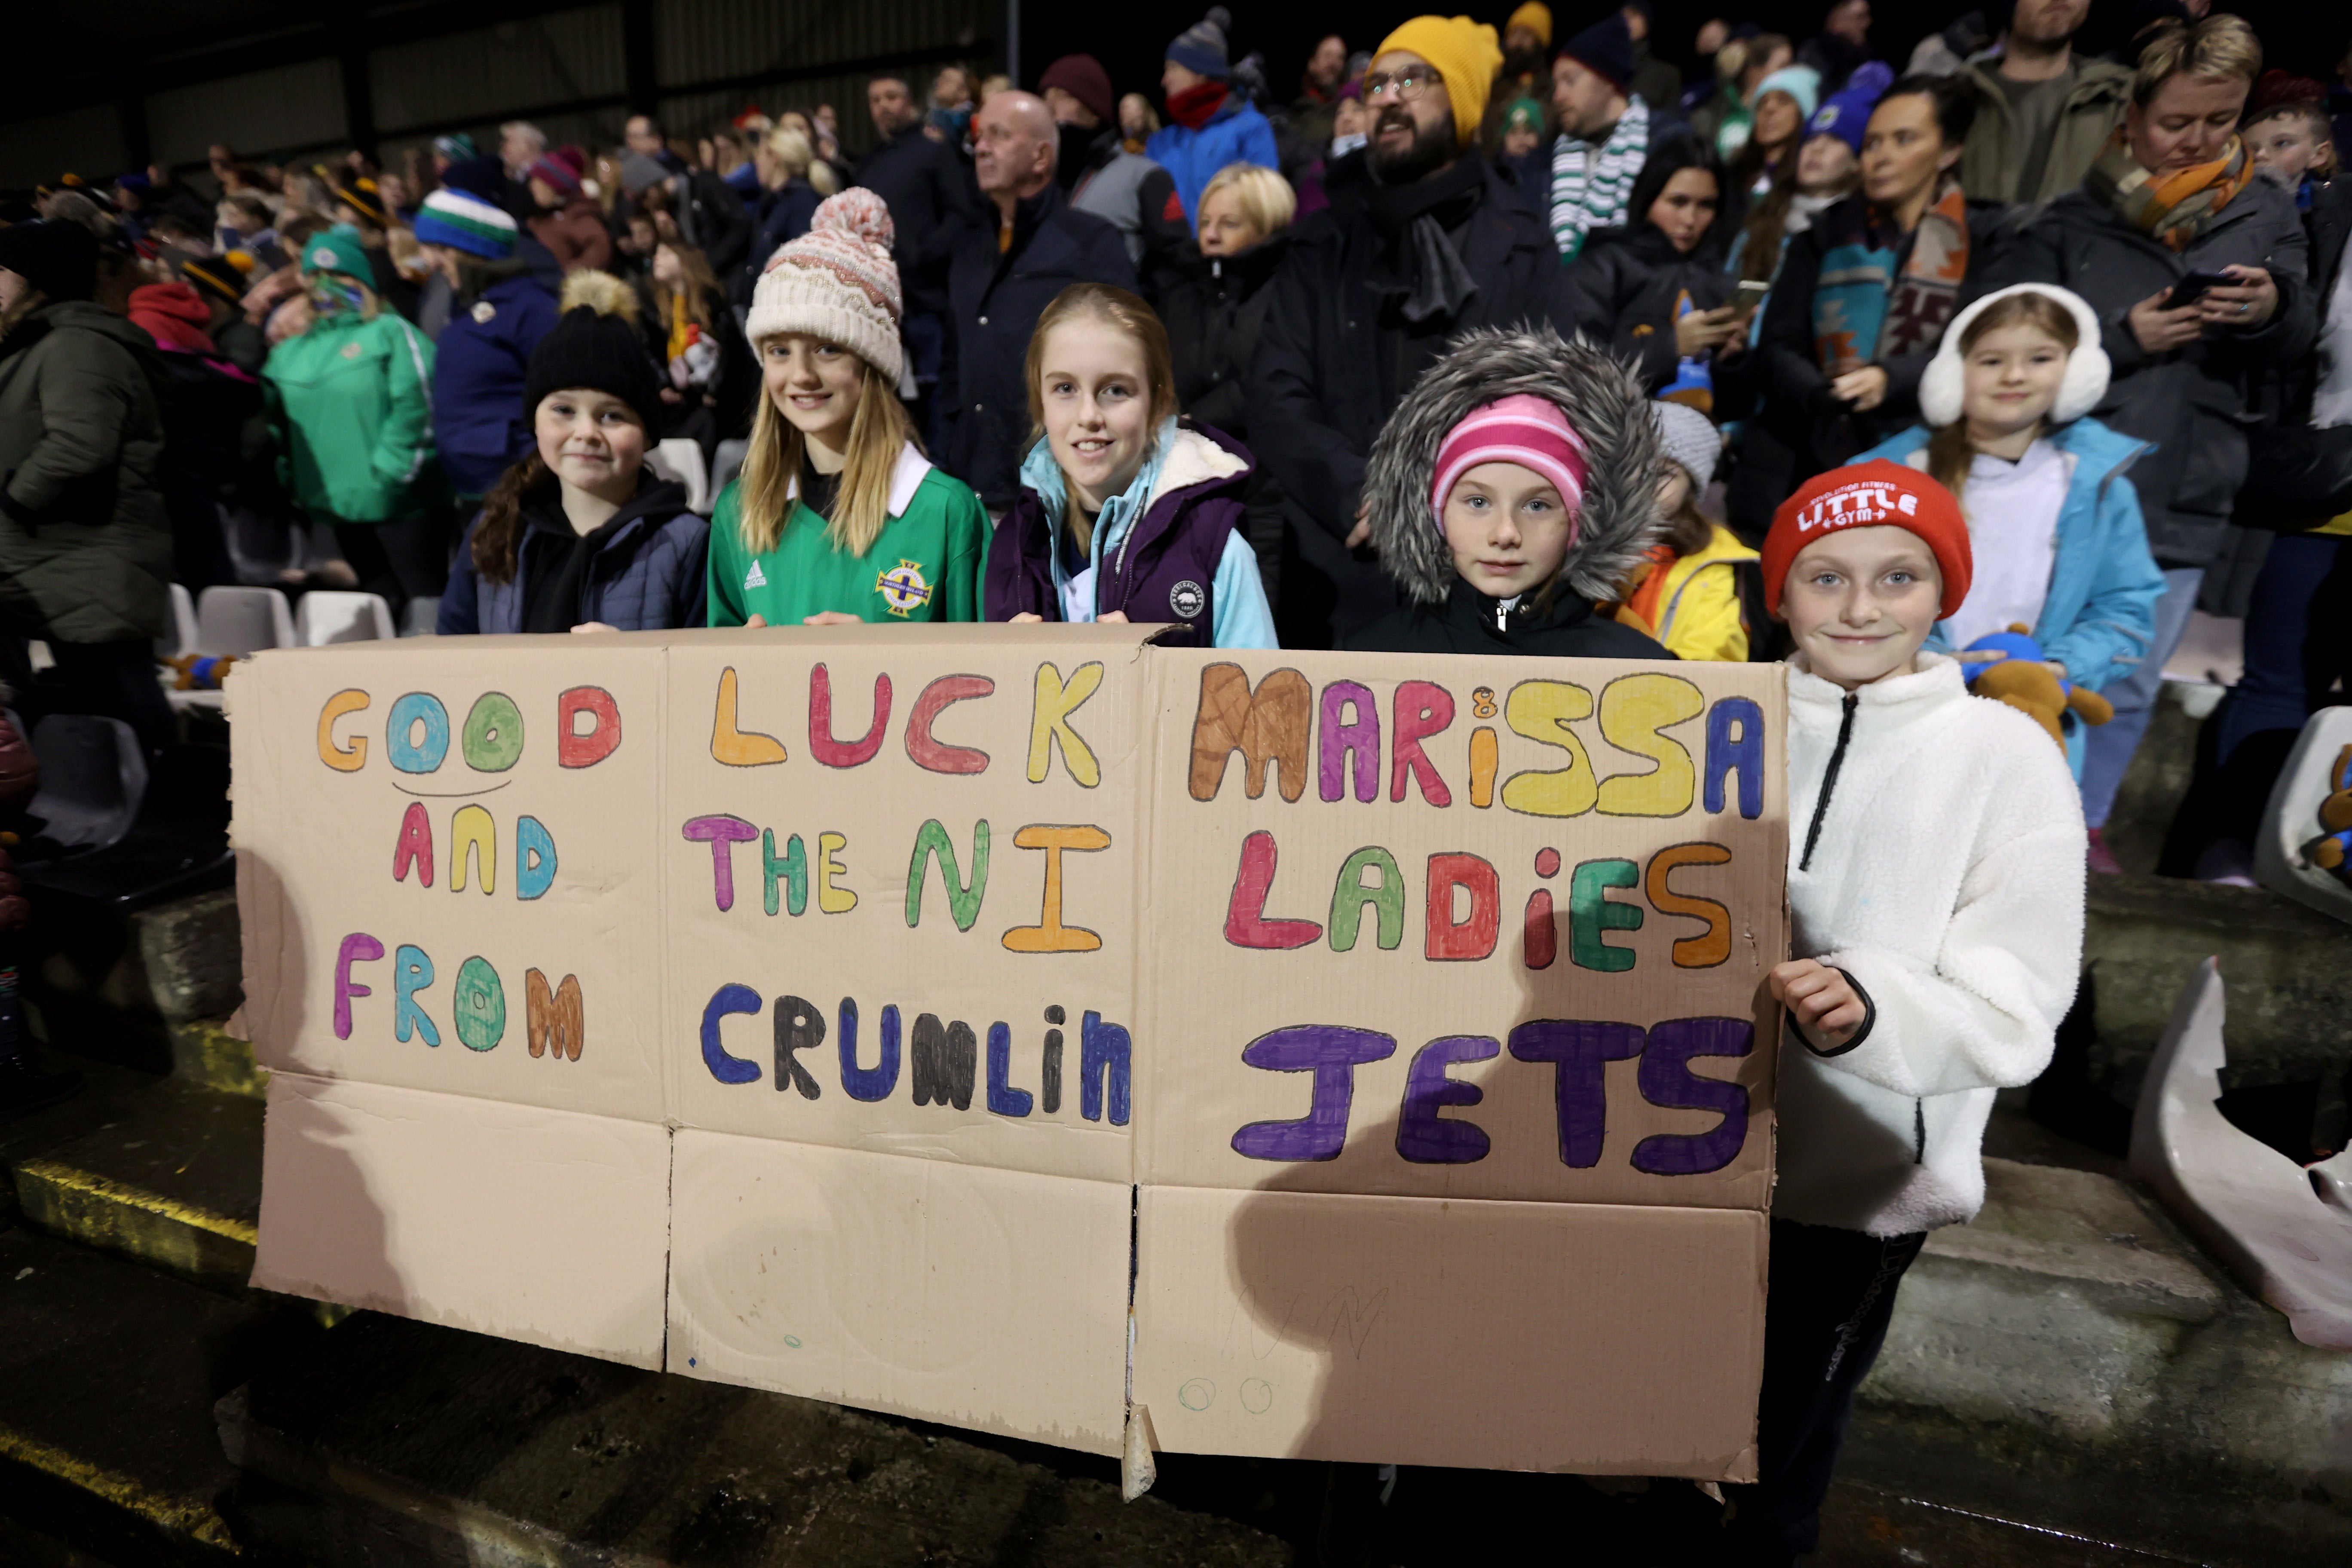 Northern Ireland fans during the FIFA Women’s World Cup 2023 qualifying match at Seaview, Belfast. Officials today spoke of the major strides made in promoting women’s sport in Northern Ireland (Liam McBurney/PA)